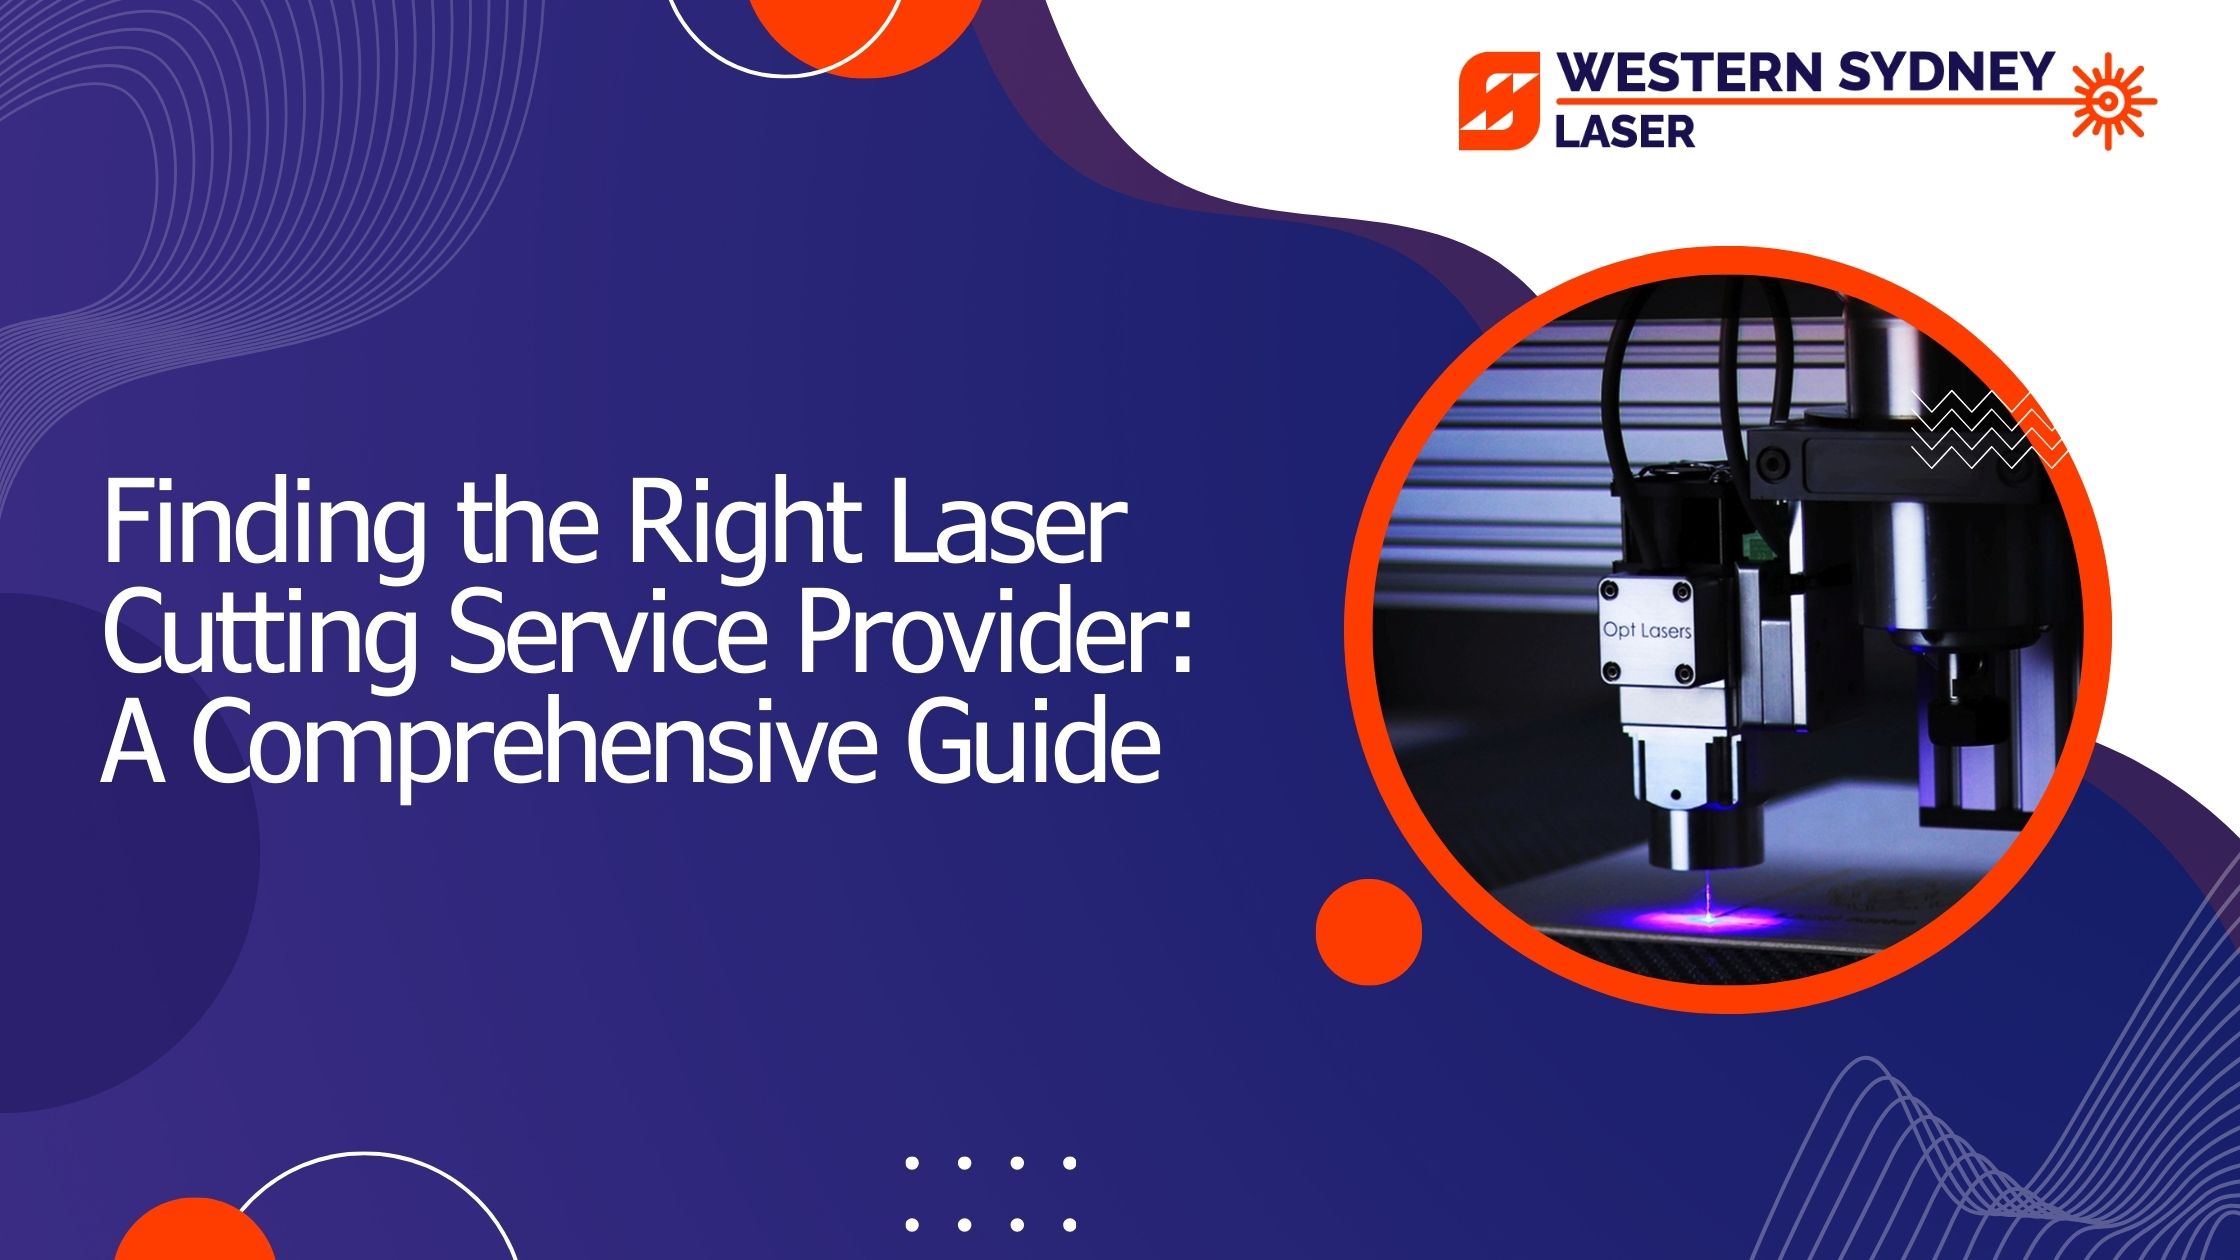 Finding the Right Laser Cutting Service Provider: A Comprehensive Guide